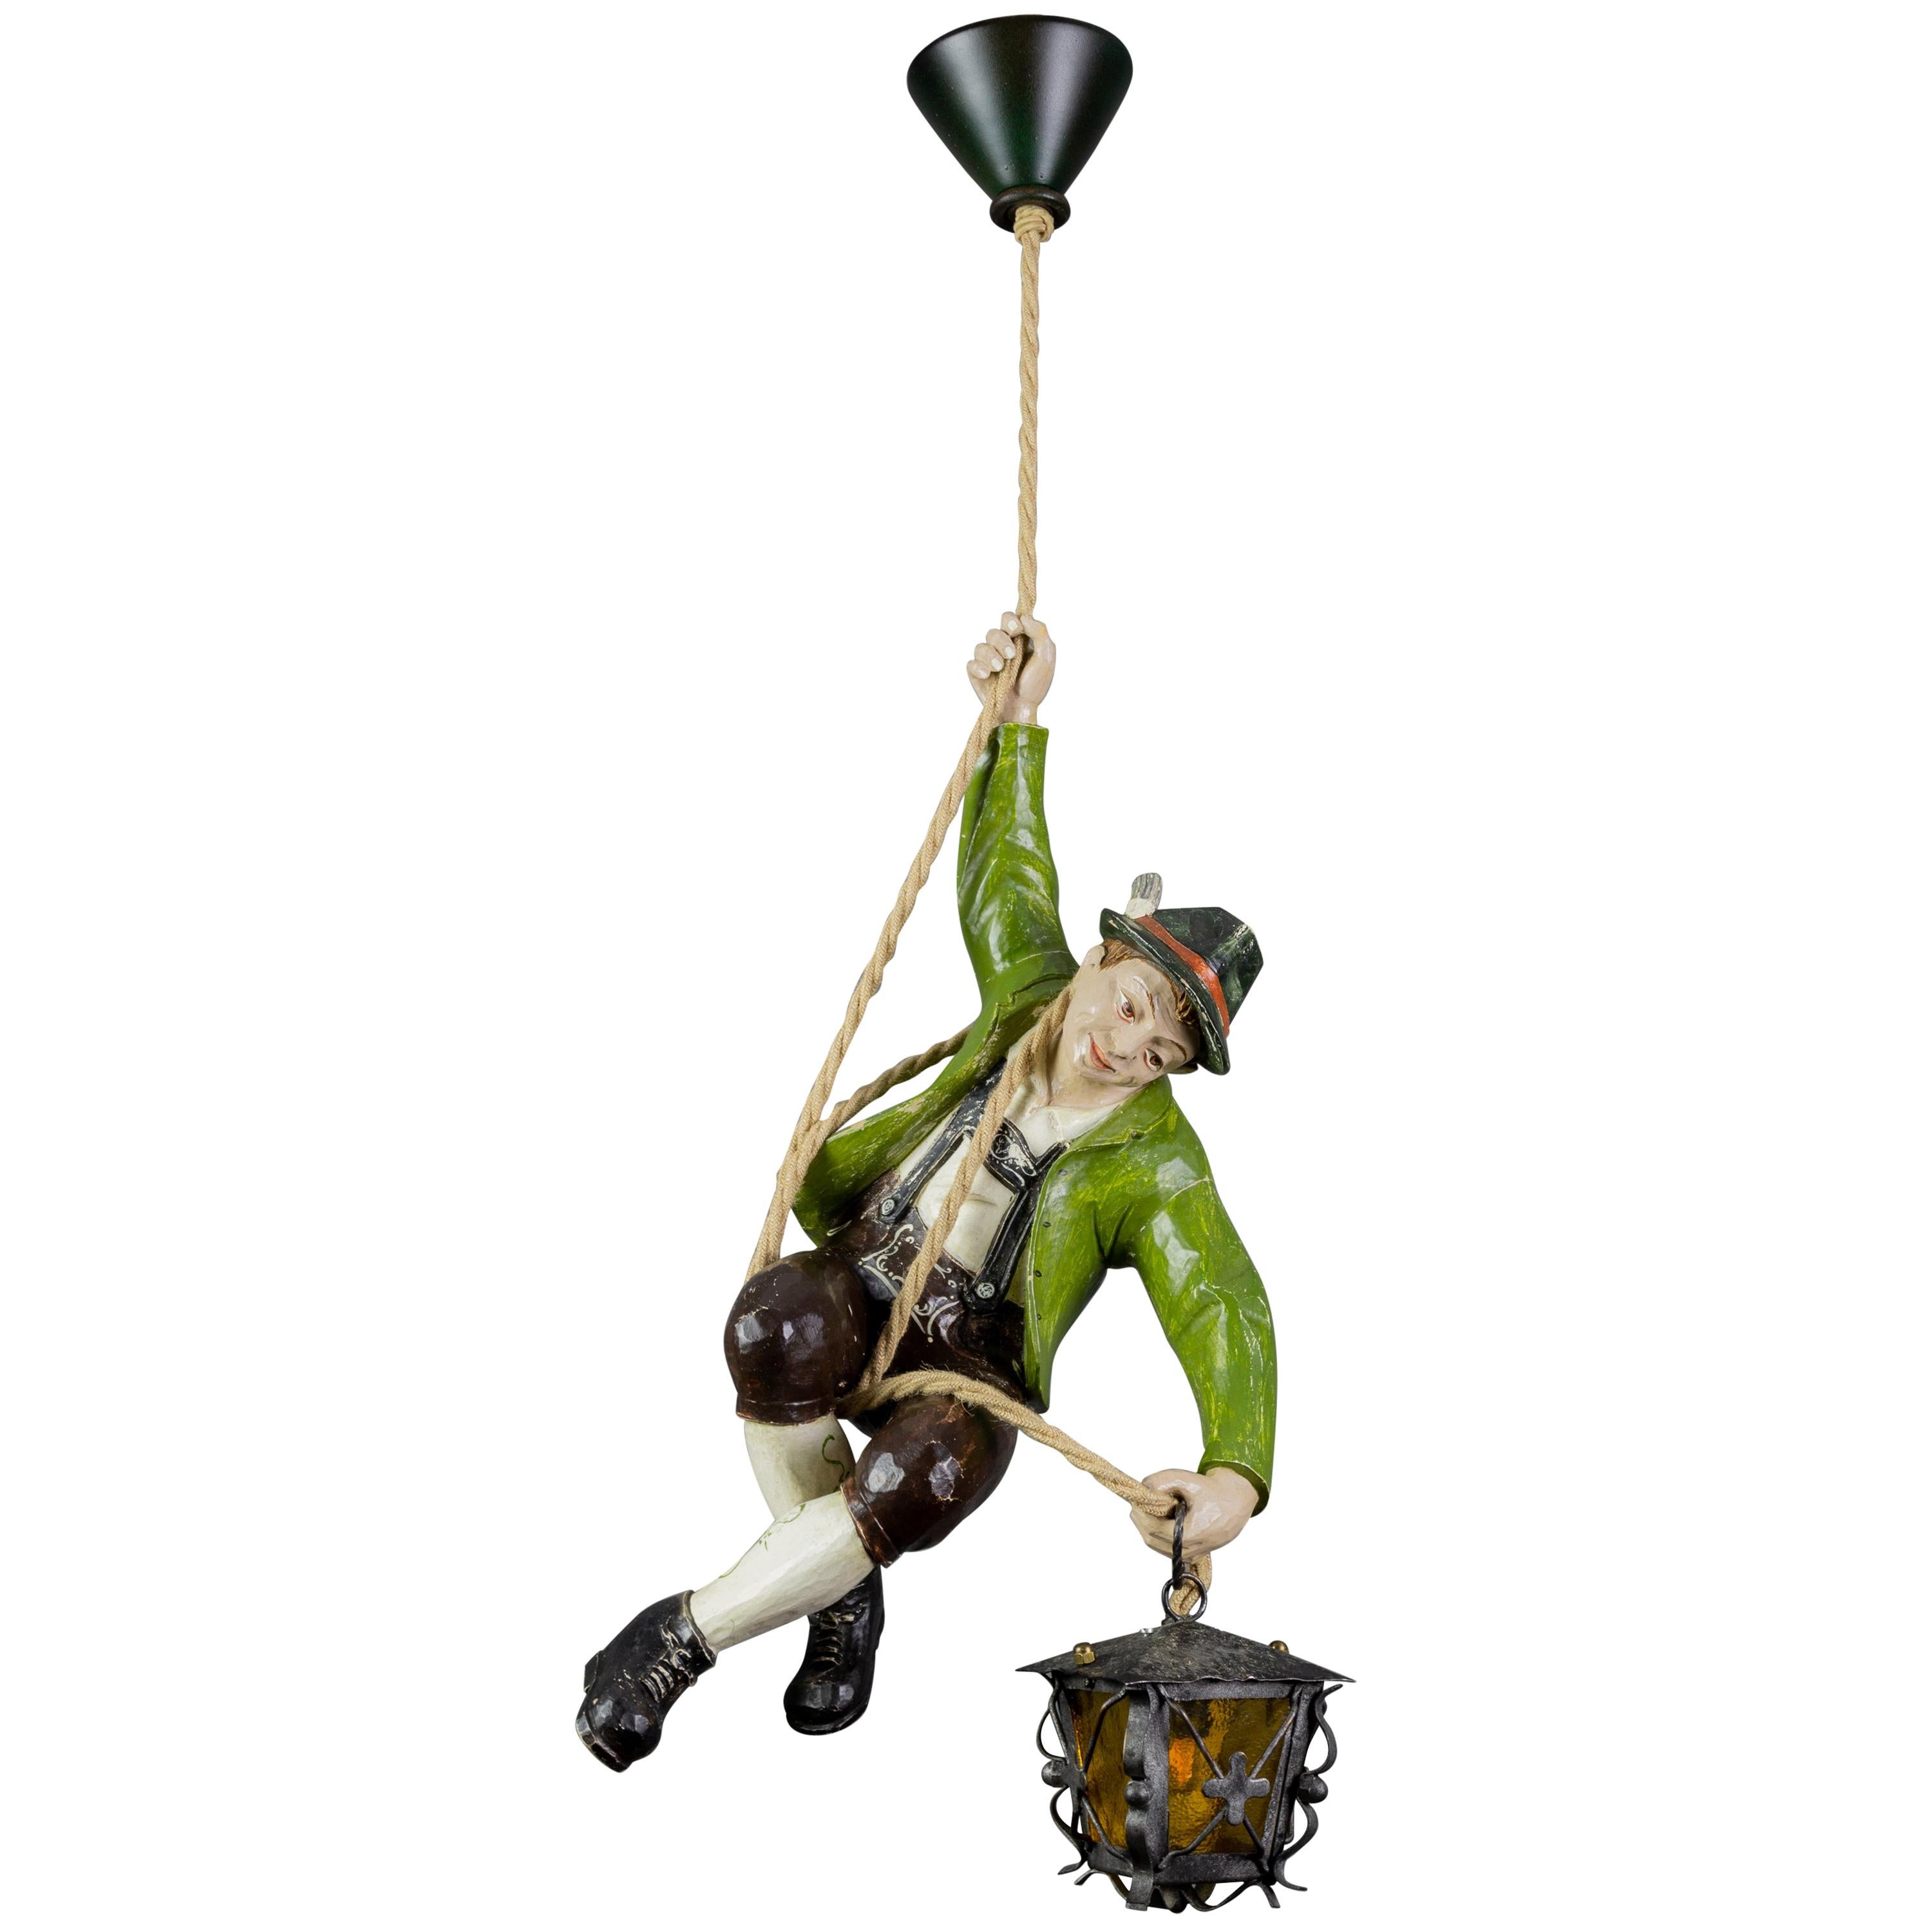 German Pendant Light with Carved Wooden Mountain Climber Figure and Lantern For Sale